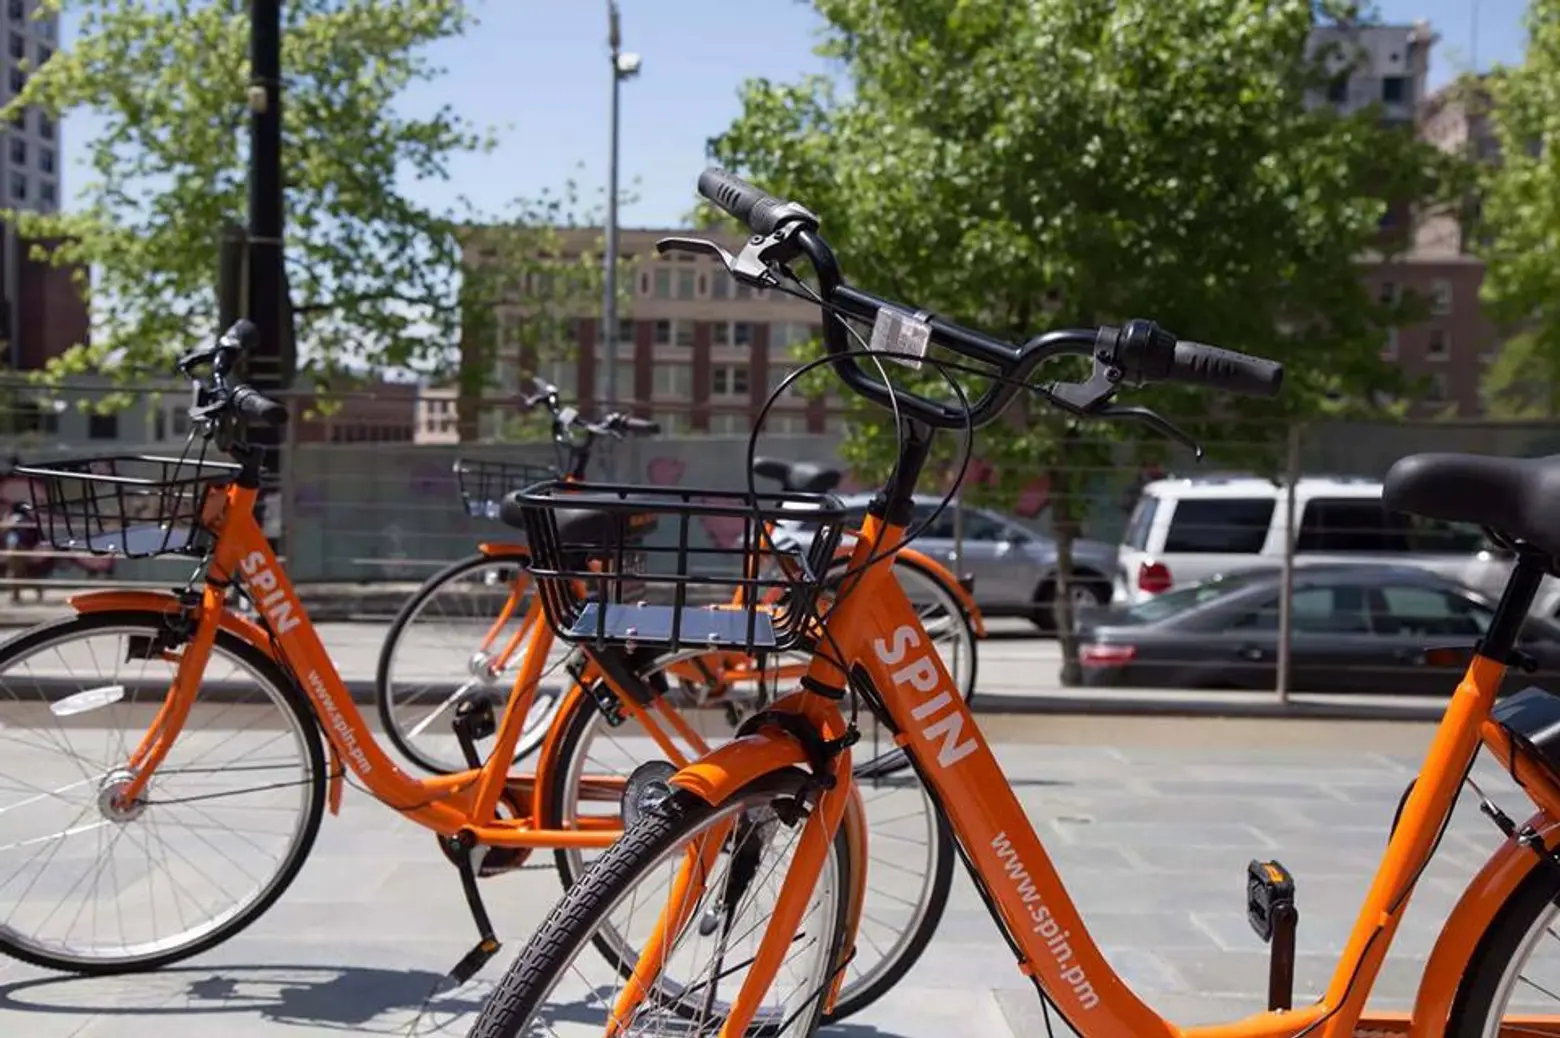 Department of Transportation is getting closer to adding dockless bikeshares throughout NYC